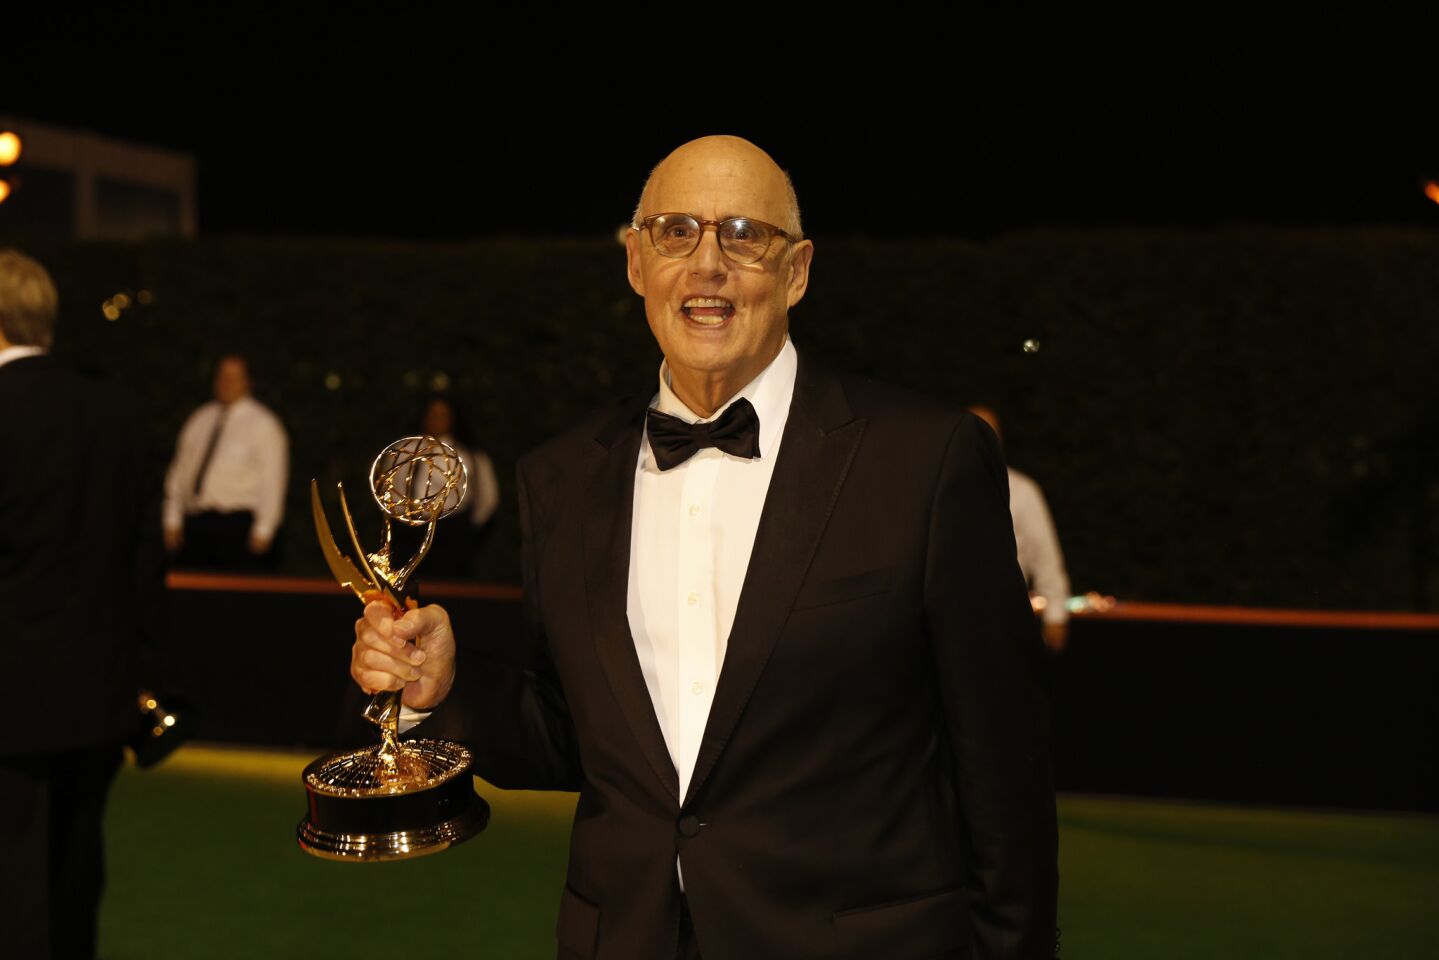 Jeffrey Tambor at the Governors Ball after the 68th Primetime Emmy Awards.